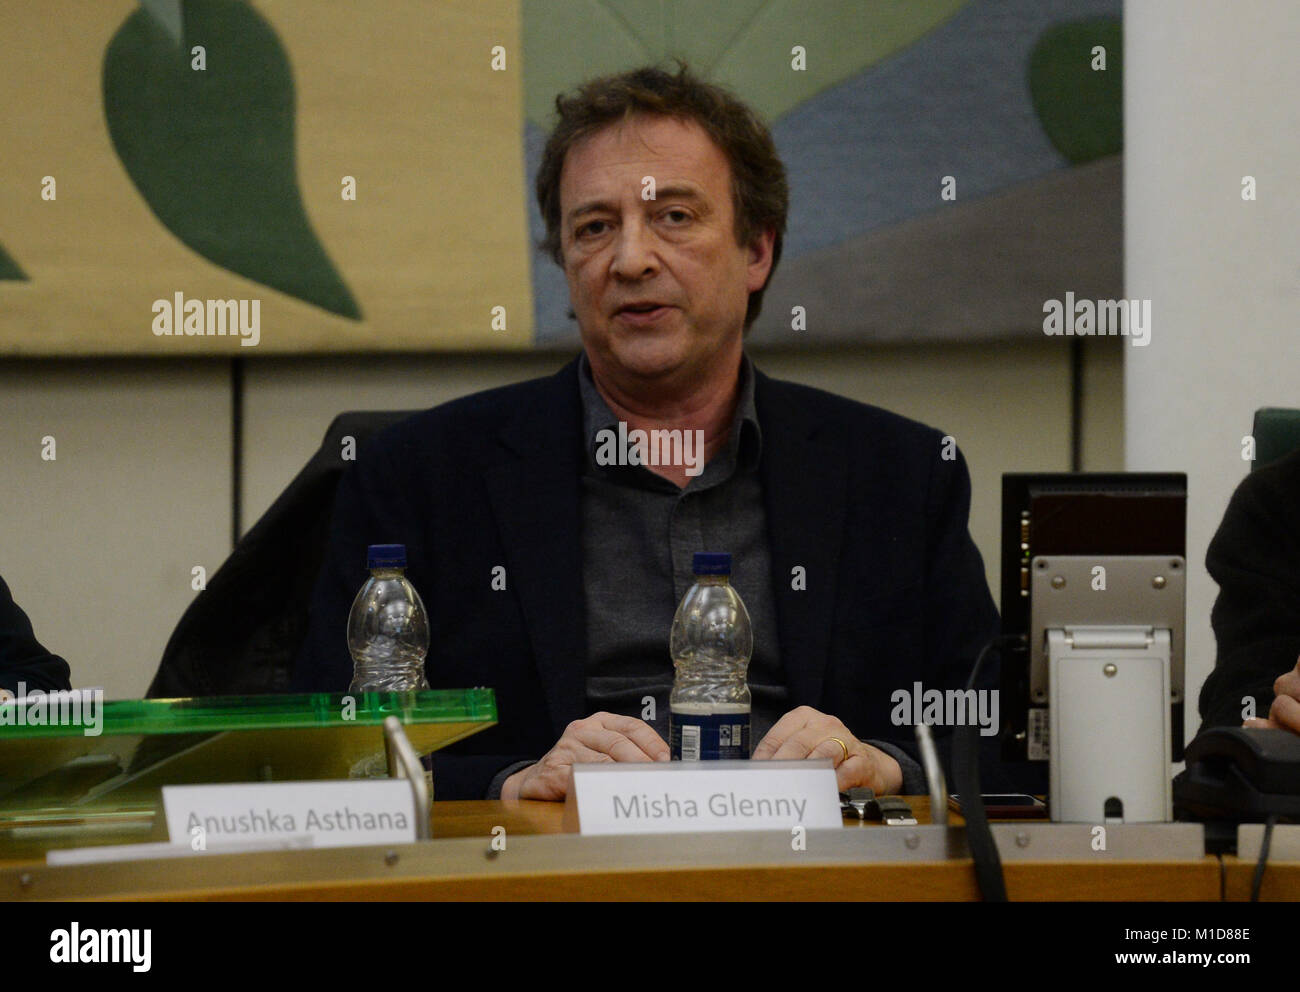 McMafia author Misha Glenny at an event held by anti-corruption NGO Global Witness at Portcullis House in Westminster, London, where new data analysis was launched detailing the number of anonymously owned properties in the UK. Stock Photo